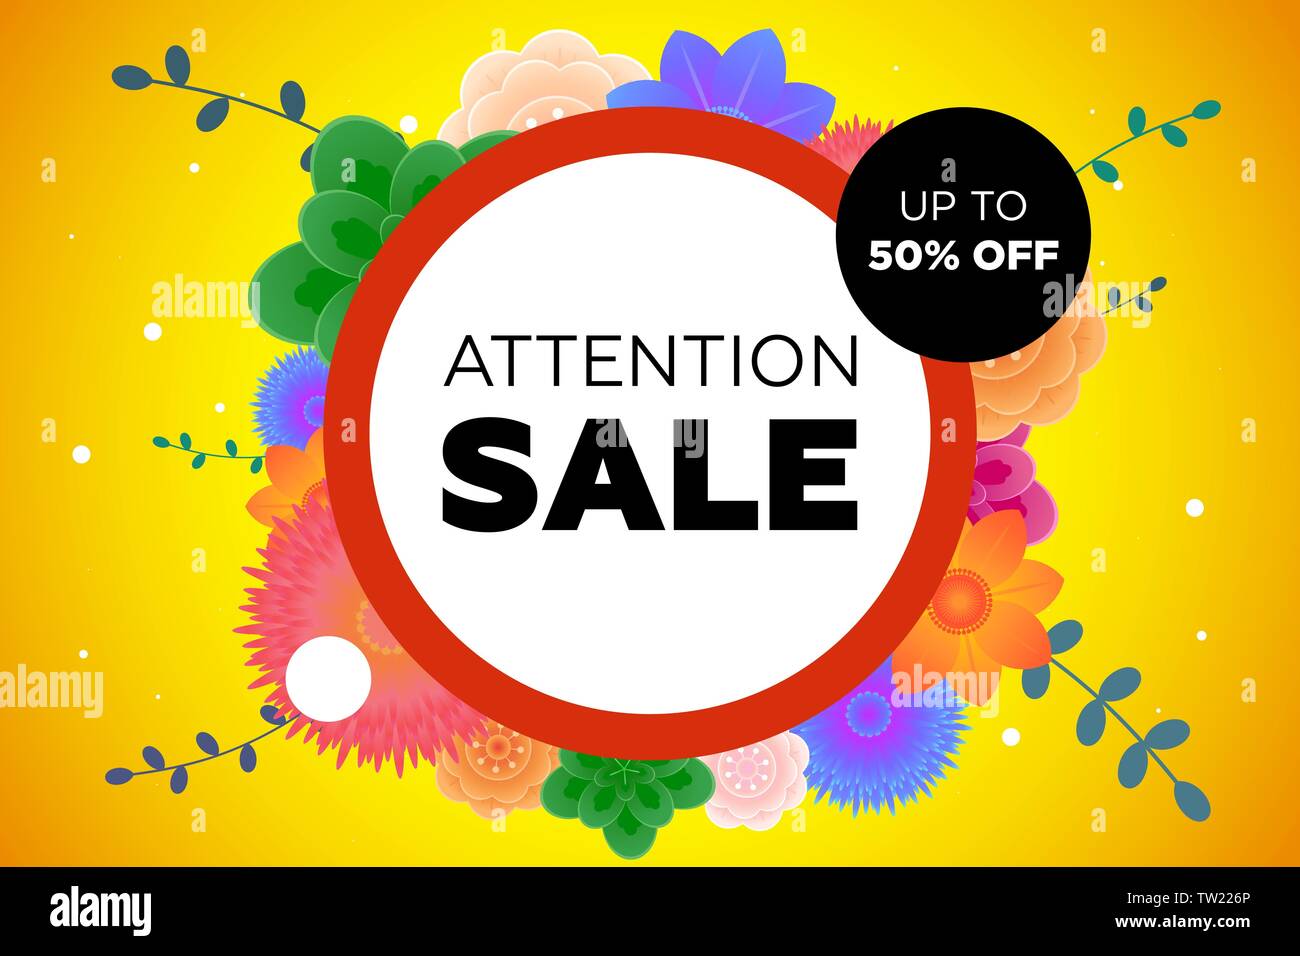 https://c8.alamy.com/comp/TW226P/attention-sale-offer-promotion-banner-with-beautiful-flowers-and-grass-up-to-50-percent-off-discount-poster-mockup-for-magazine-advertising-web-site-TW226P.jpg